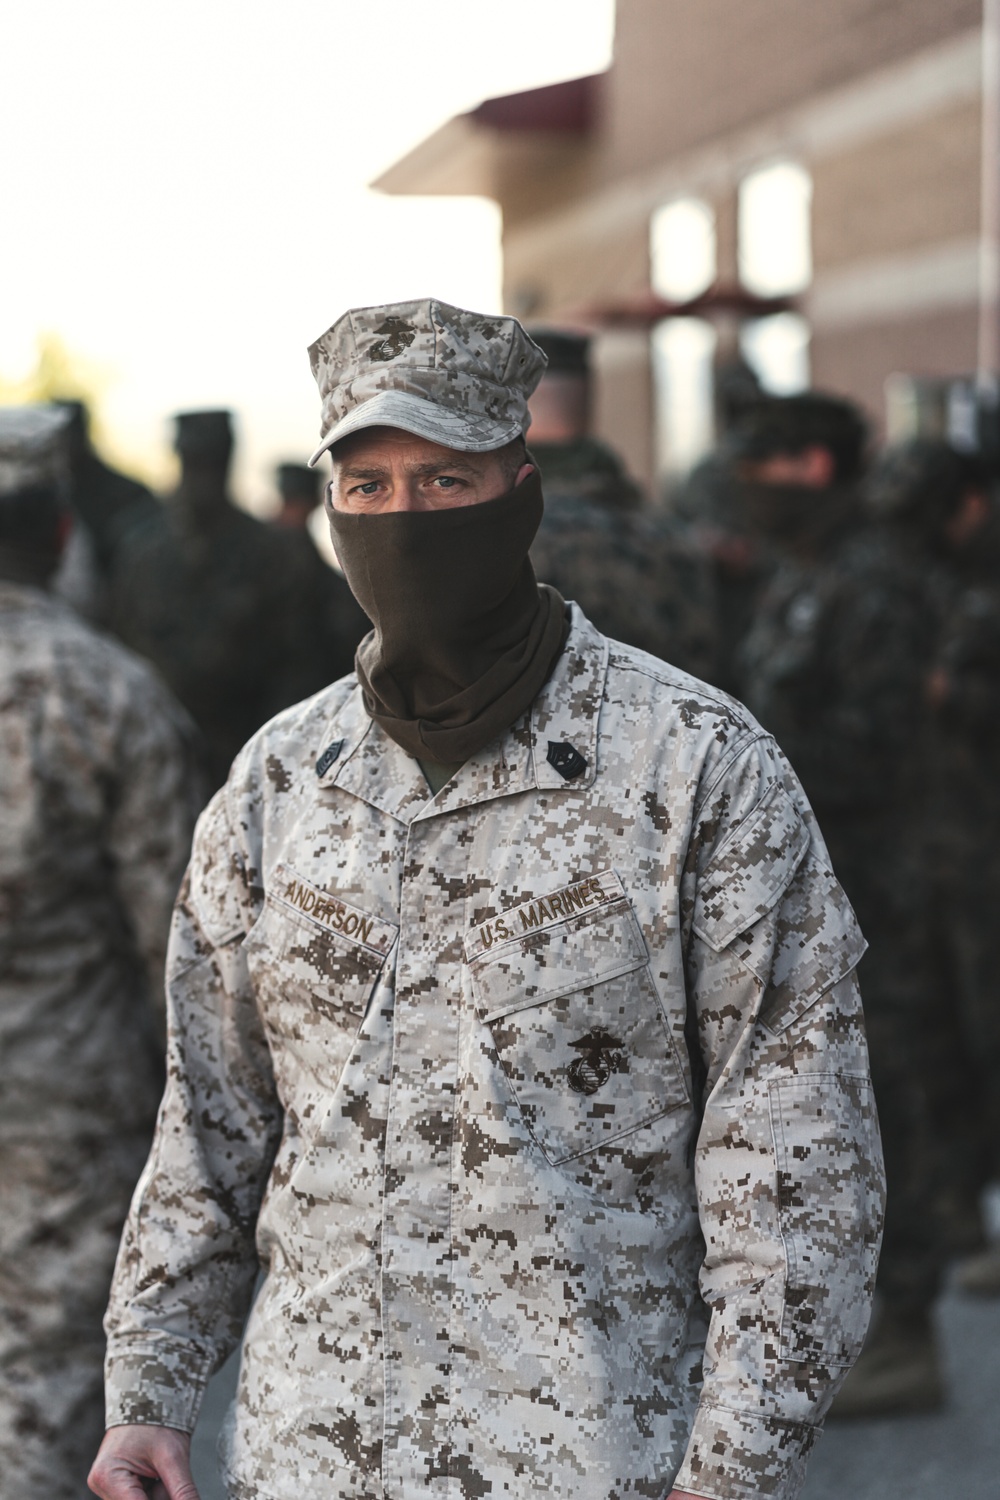 1st Battalion, 7th Marines prepare to depart for the USNS Mercy